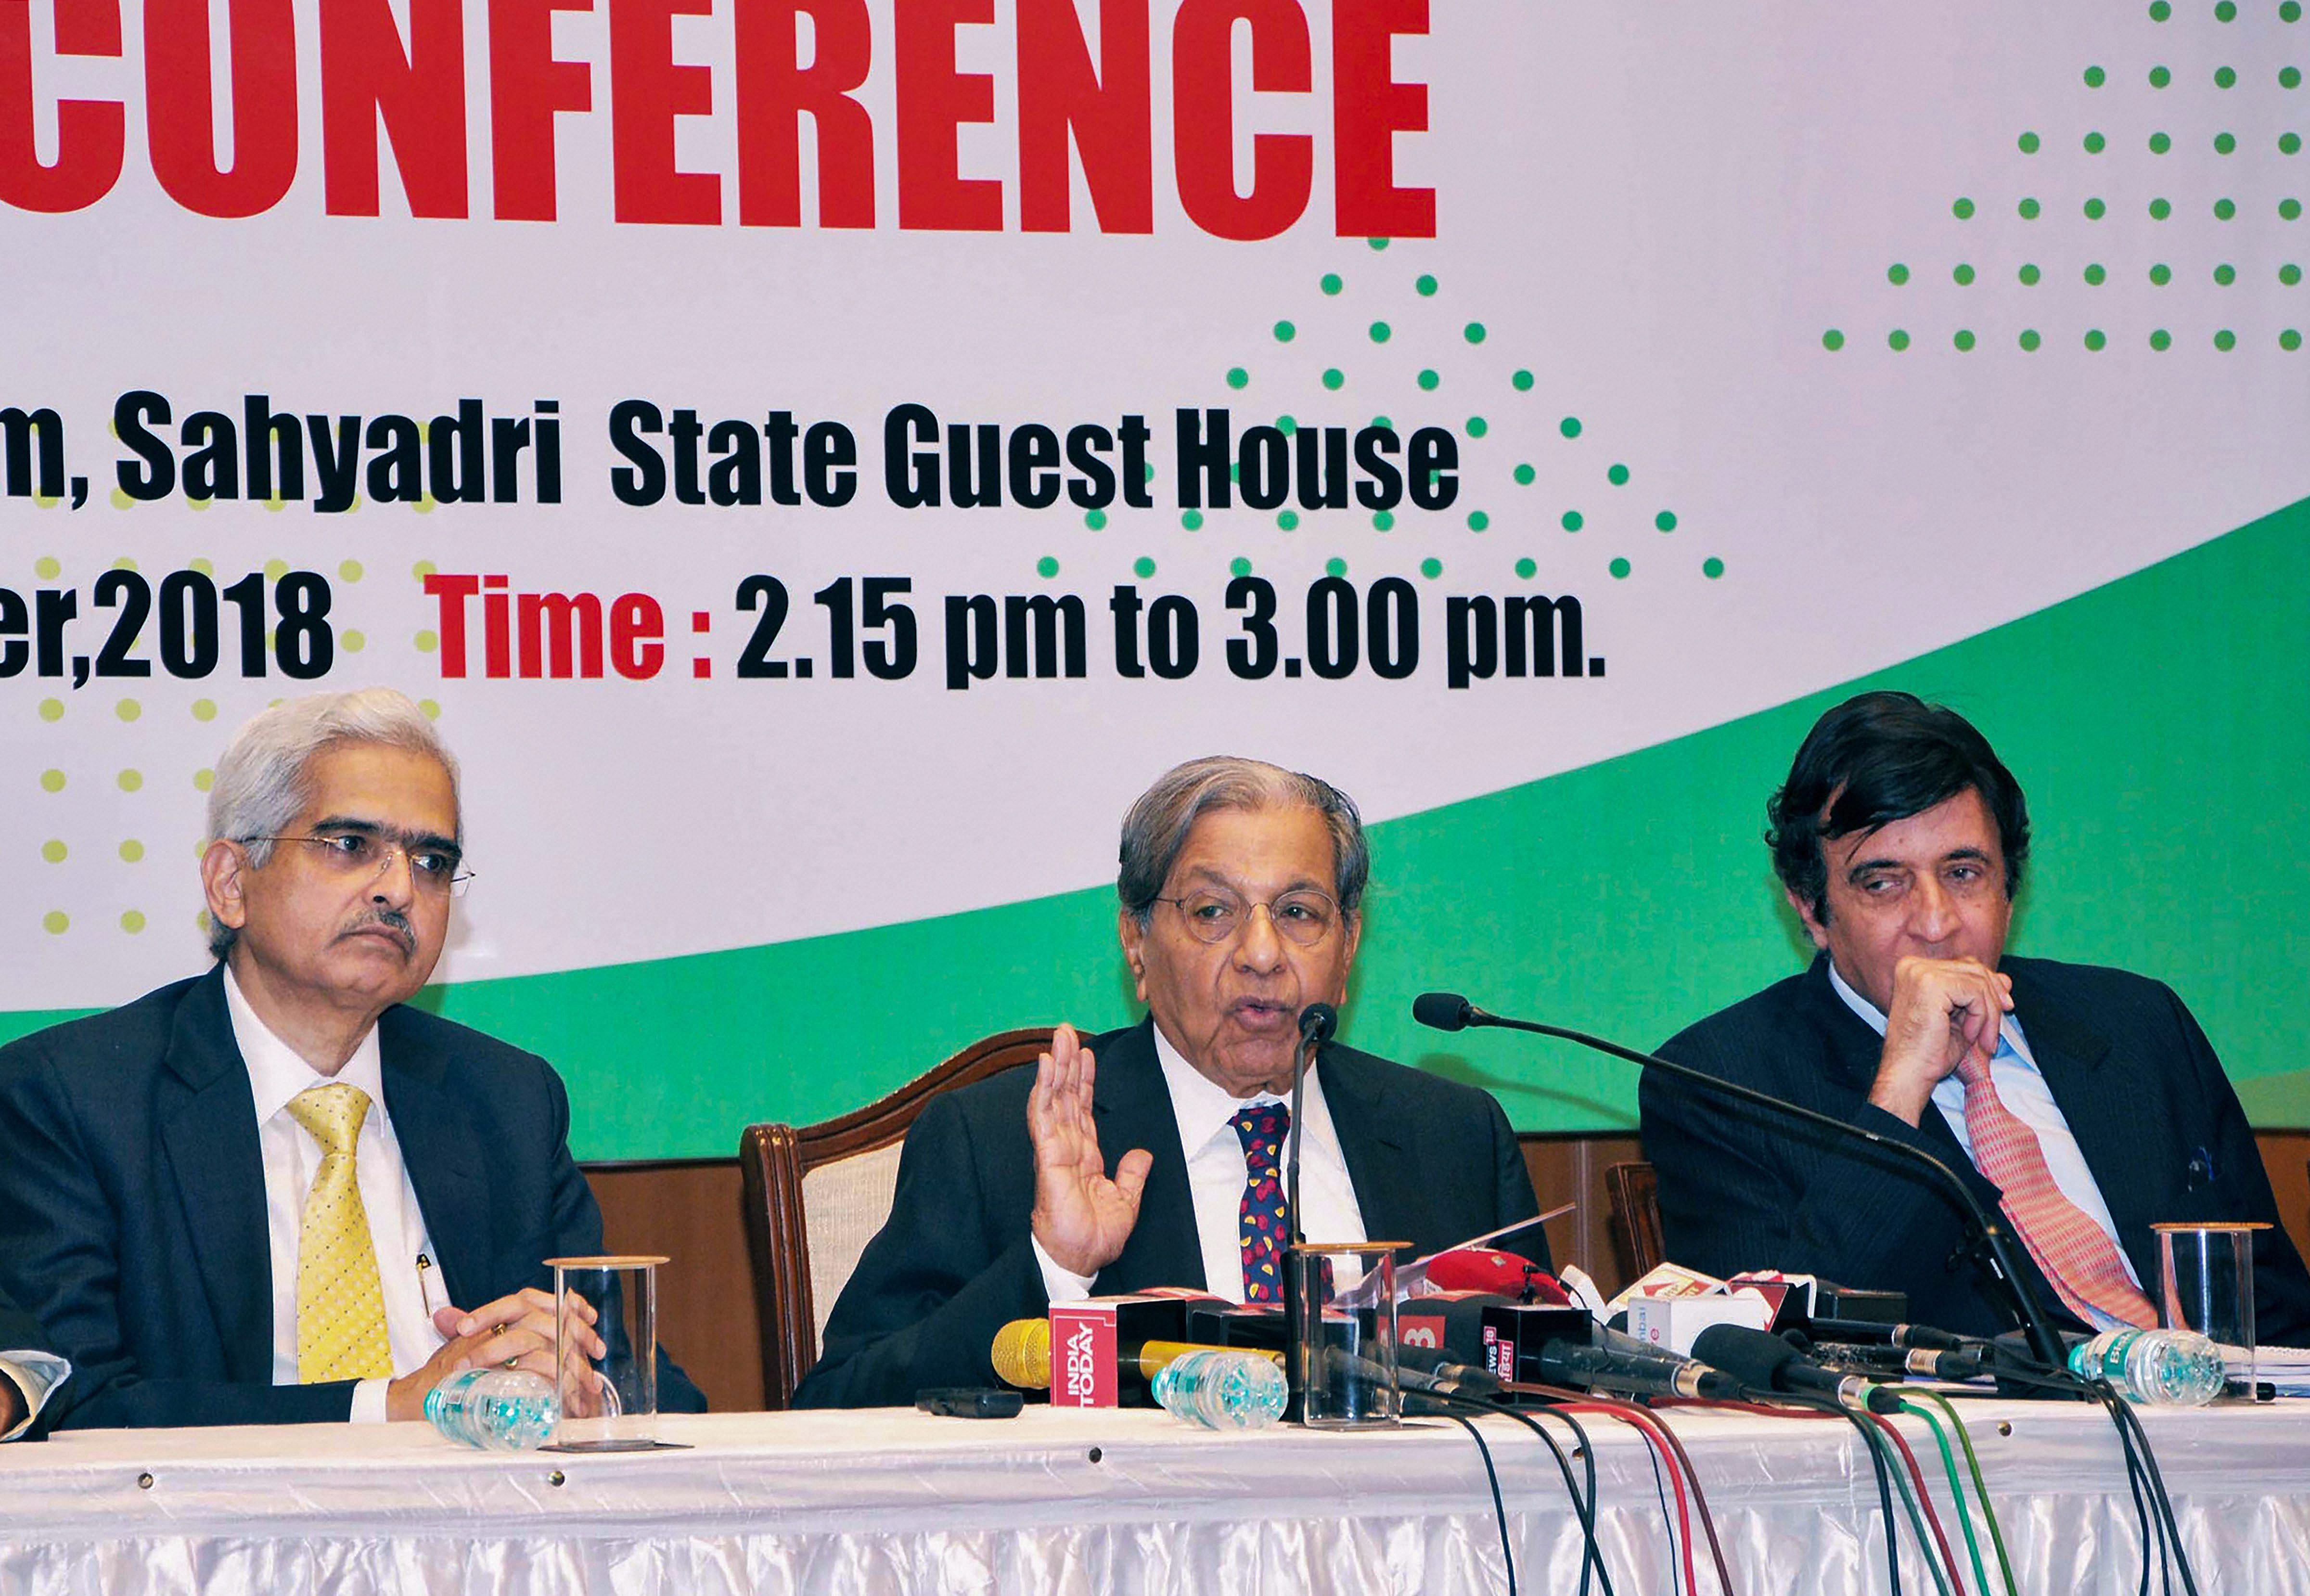 The national-level meeting is aimed at bringing together states, which are opposed to the Terms of Reference of the 15th Finance Commission led by N K Singh